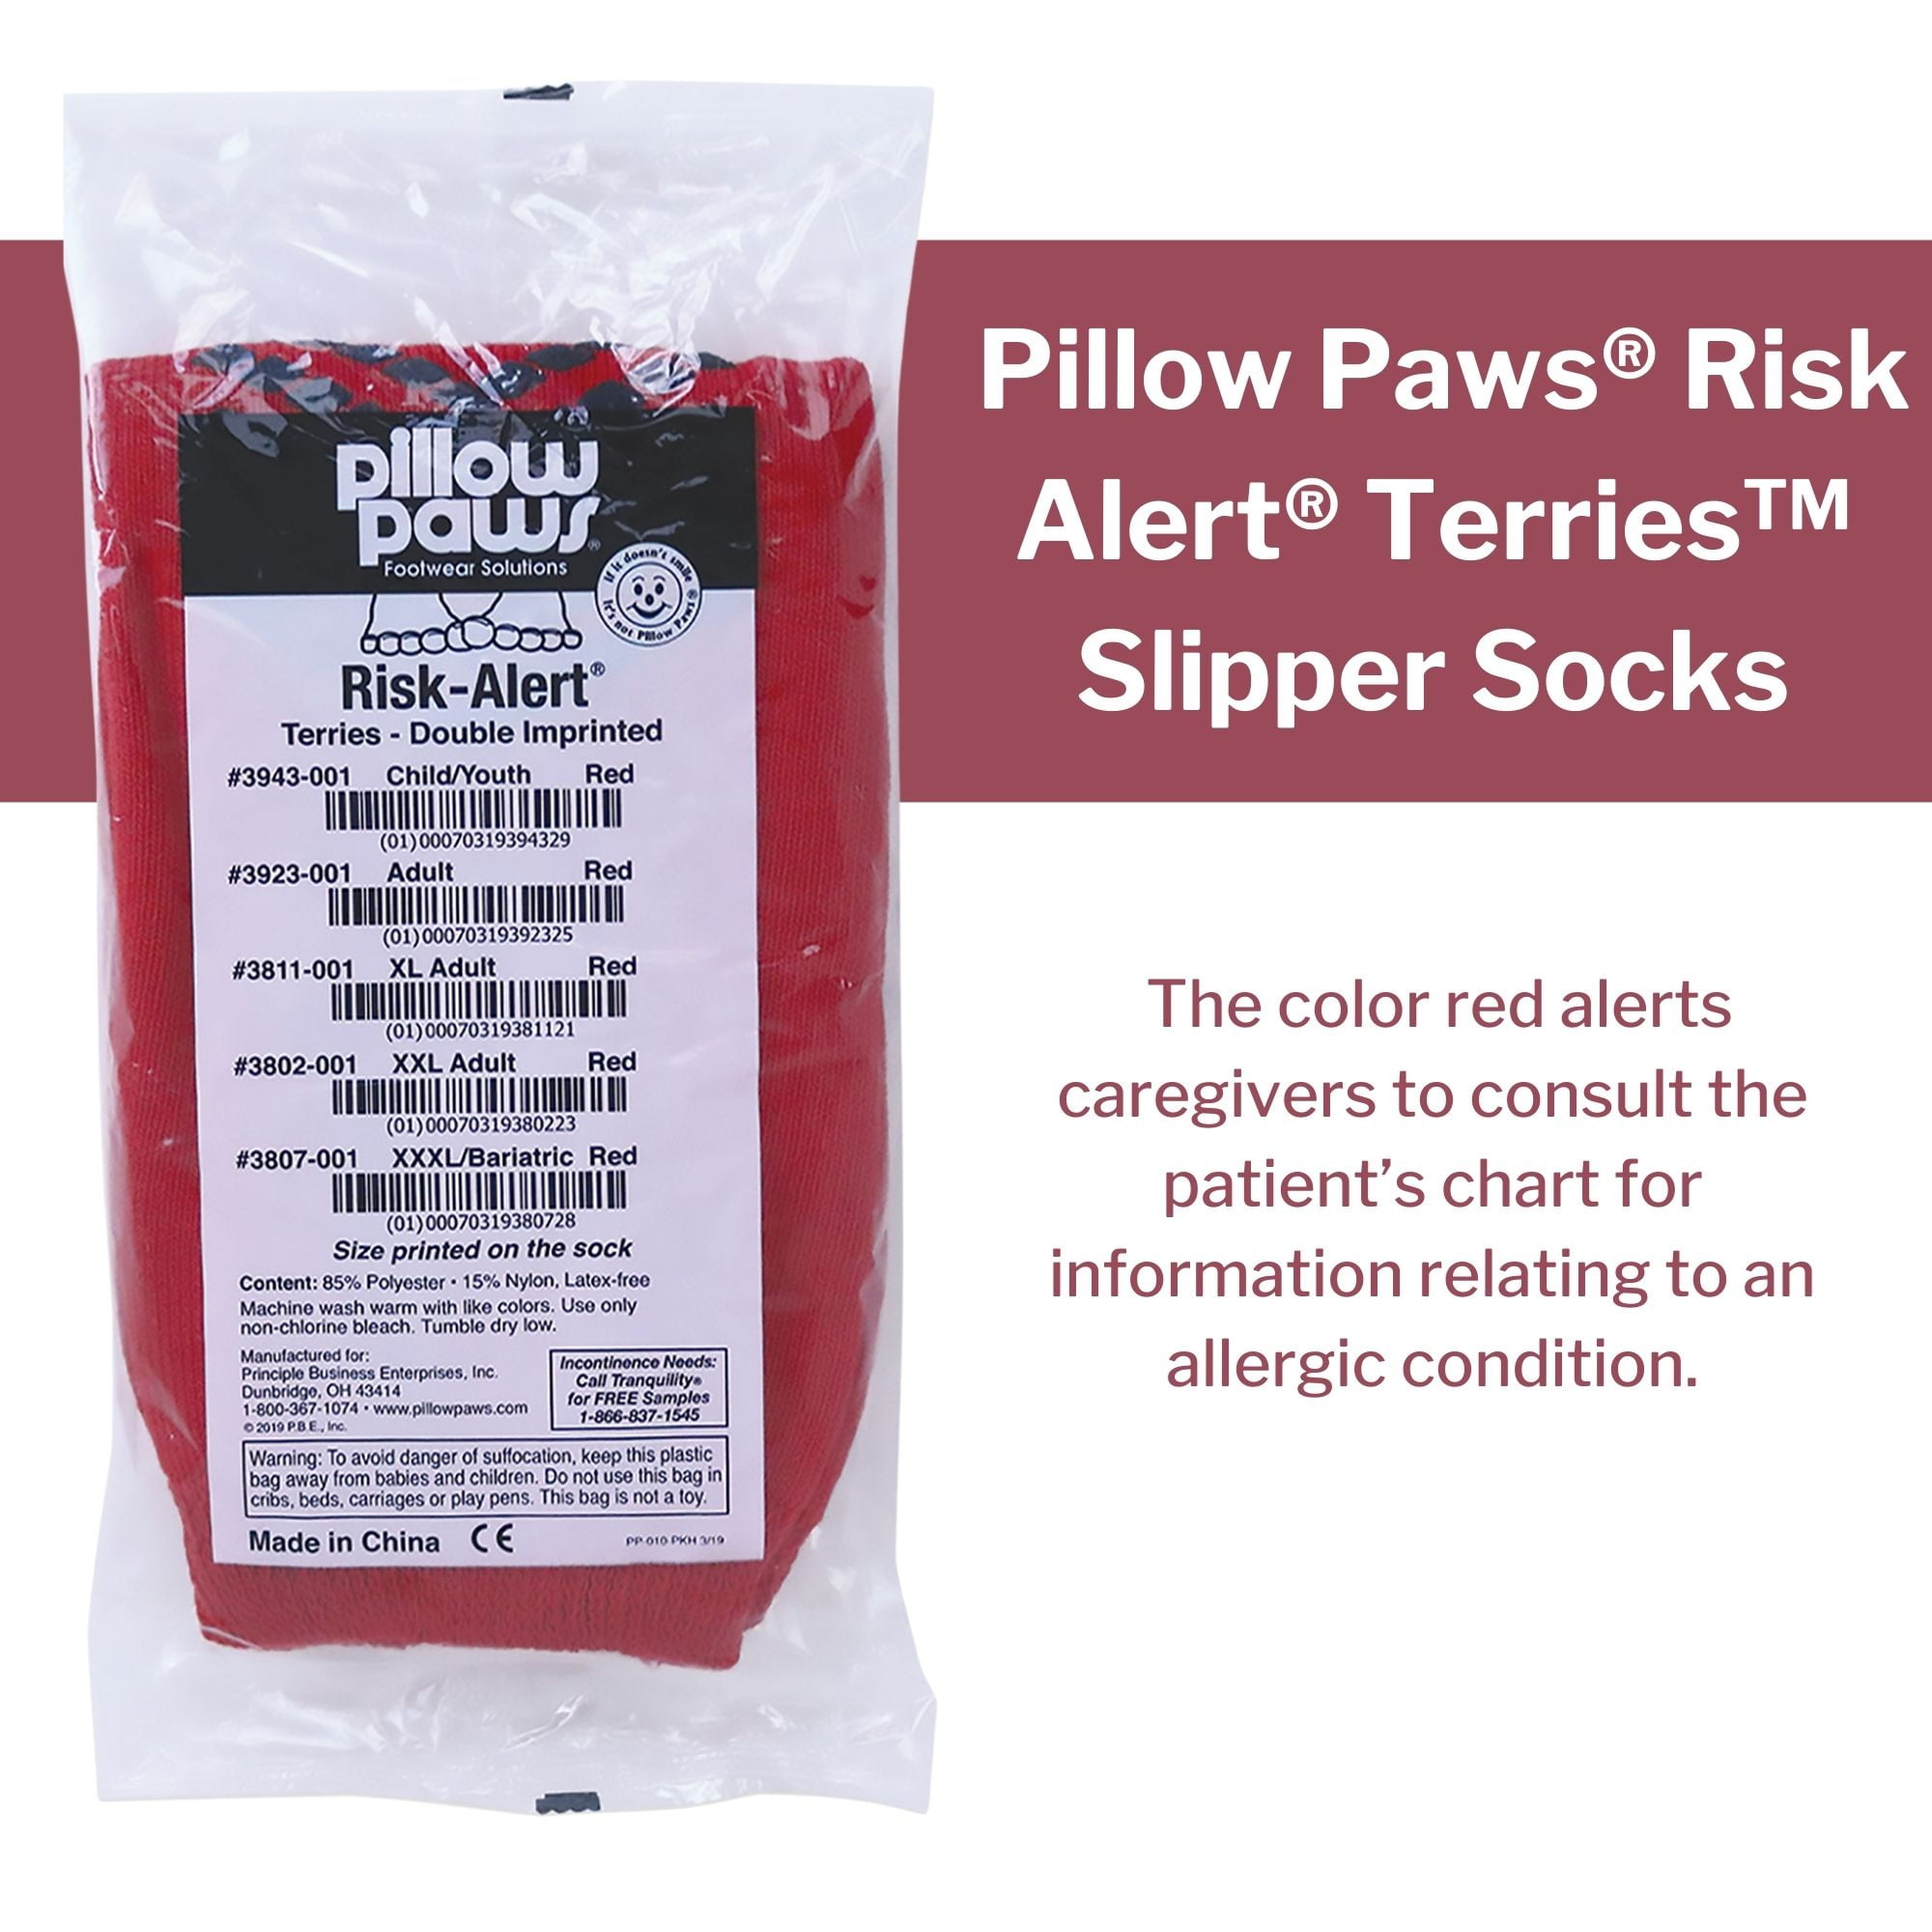 Pillow Paws Red Adult Slipper Socks, Skid-Resistant Sole, Shoe Size 10.5  and up, 1 Pair 